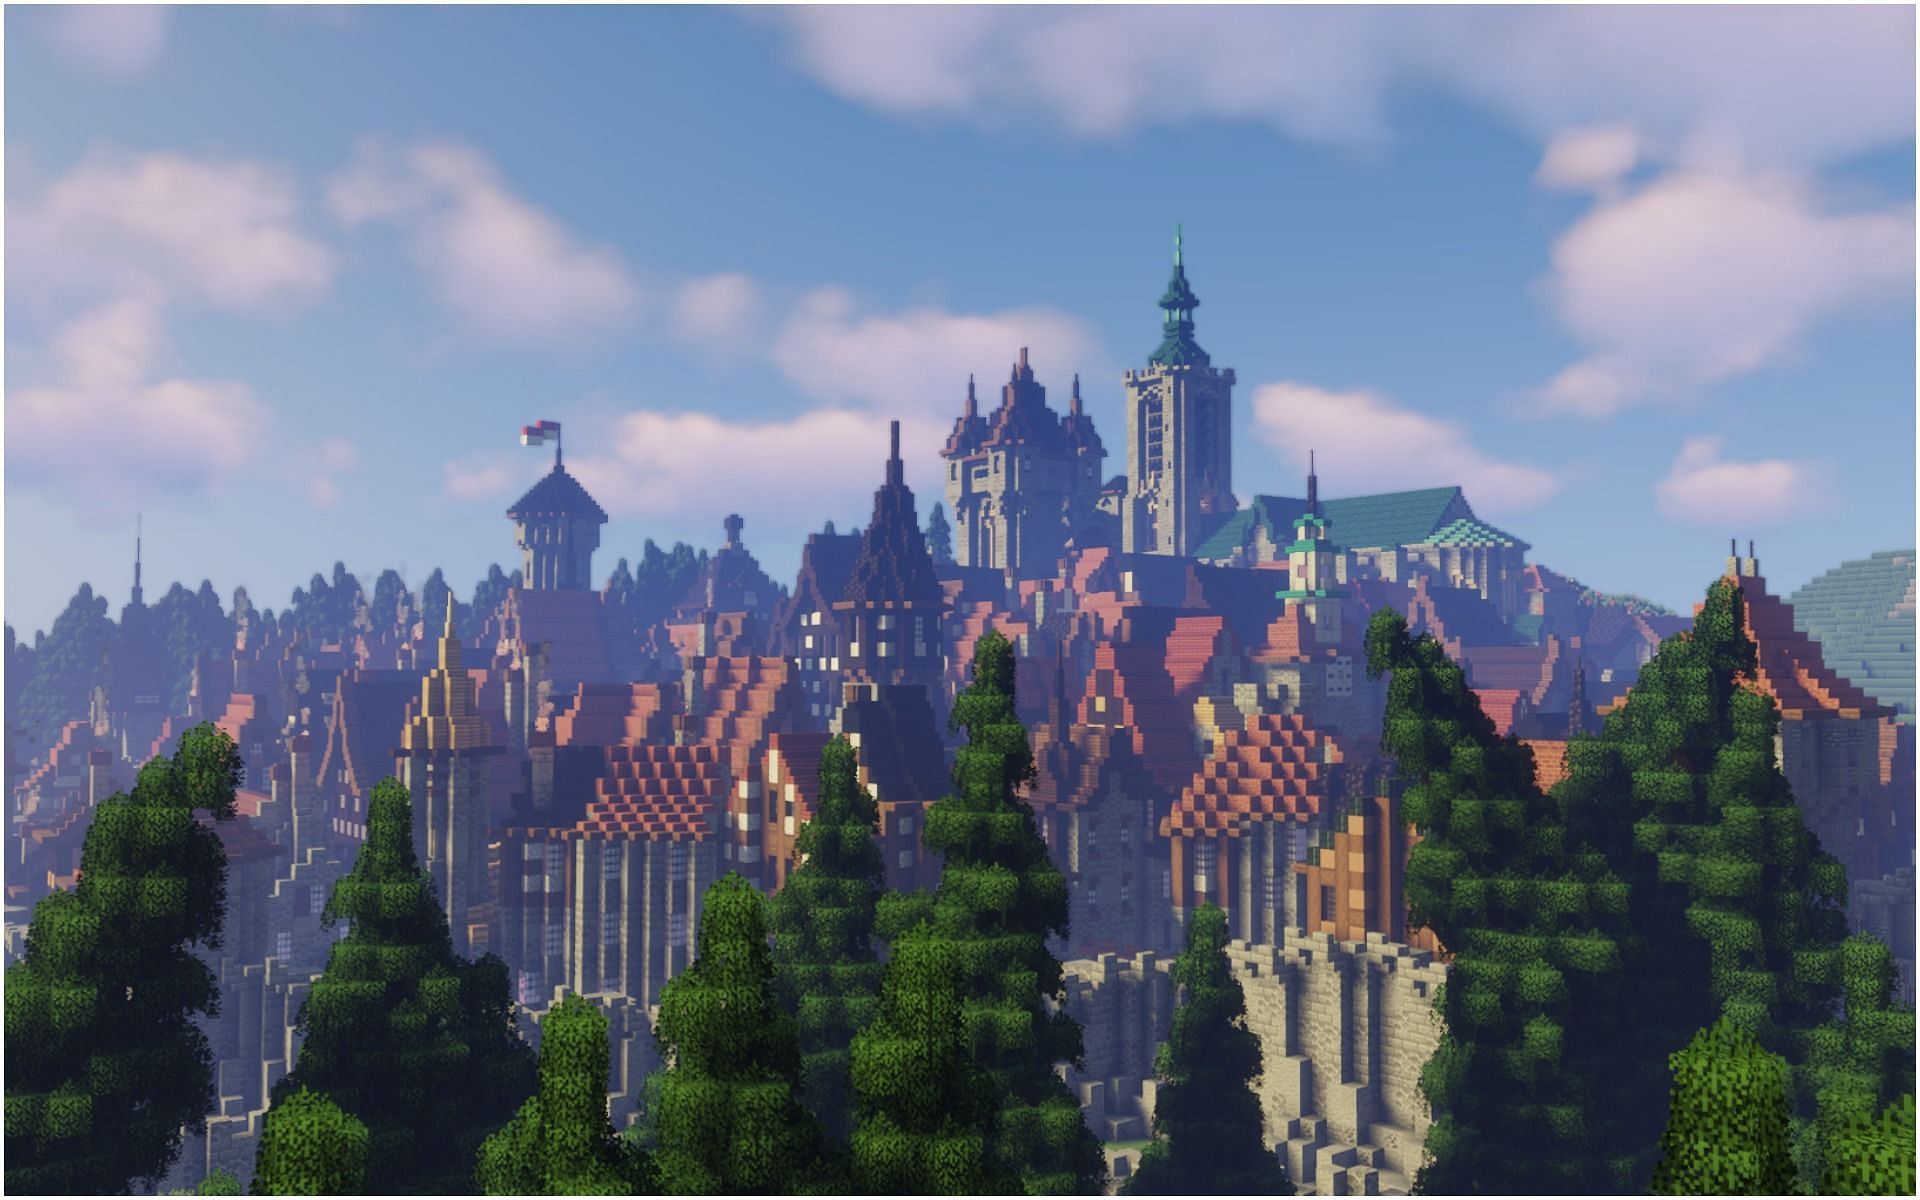 Minecraft, How to Build a Medieval Village